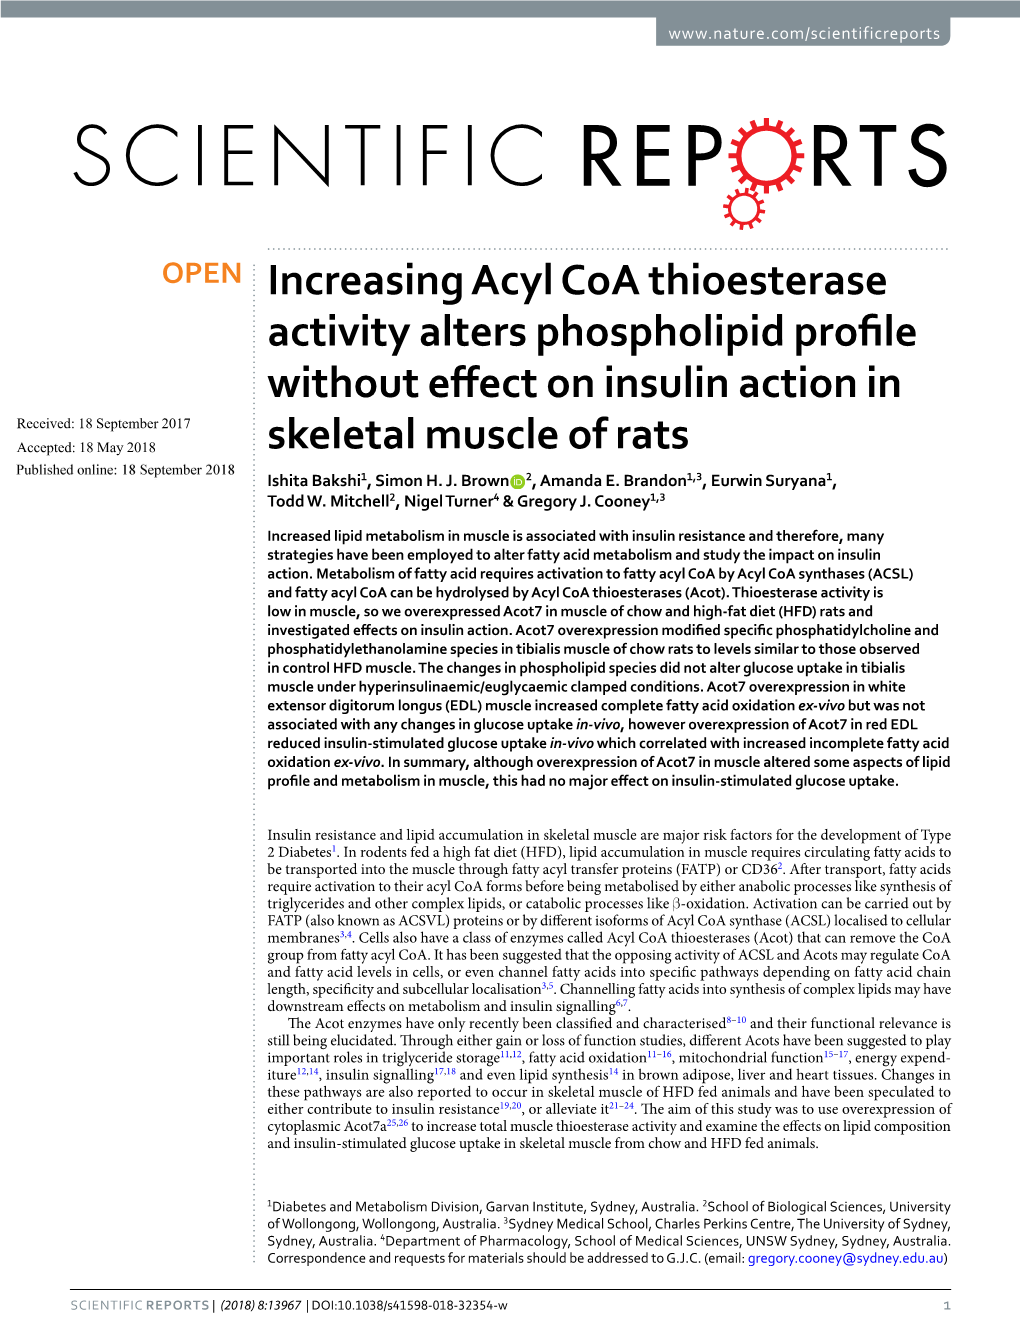 Increasing Acyl Coa Thioesterase Activity Alters Phospholipid Profile Without Effect on Insulin Action in Skeletal Muscle Of